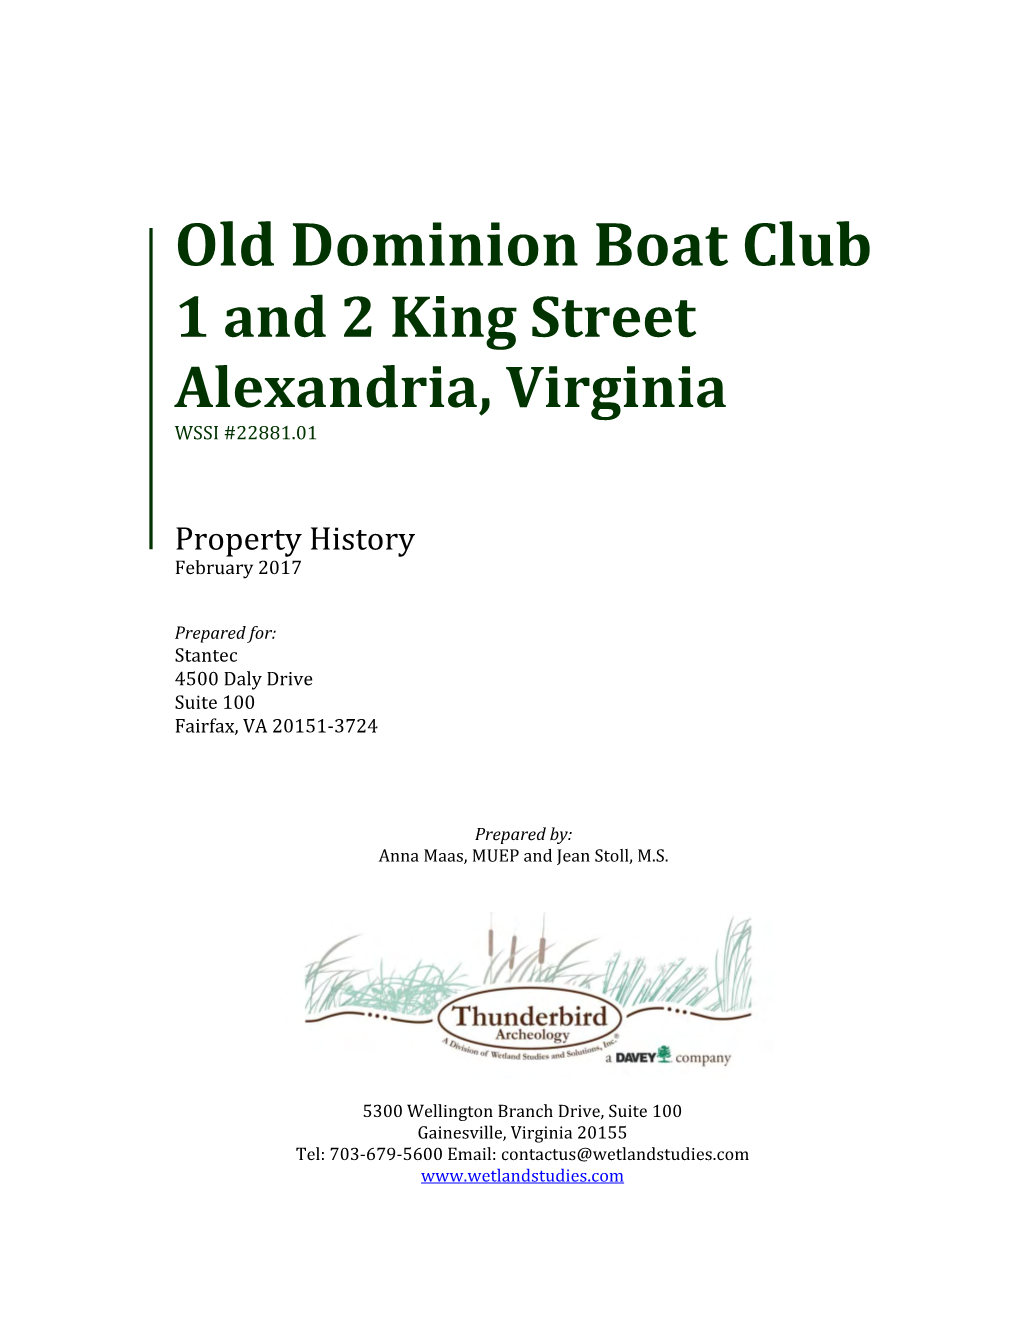 Old Dominion Boat Club 1 and 2 King Street Alexandria, Virginia WSSI #22881.01